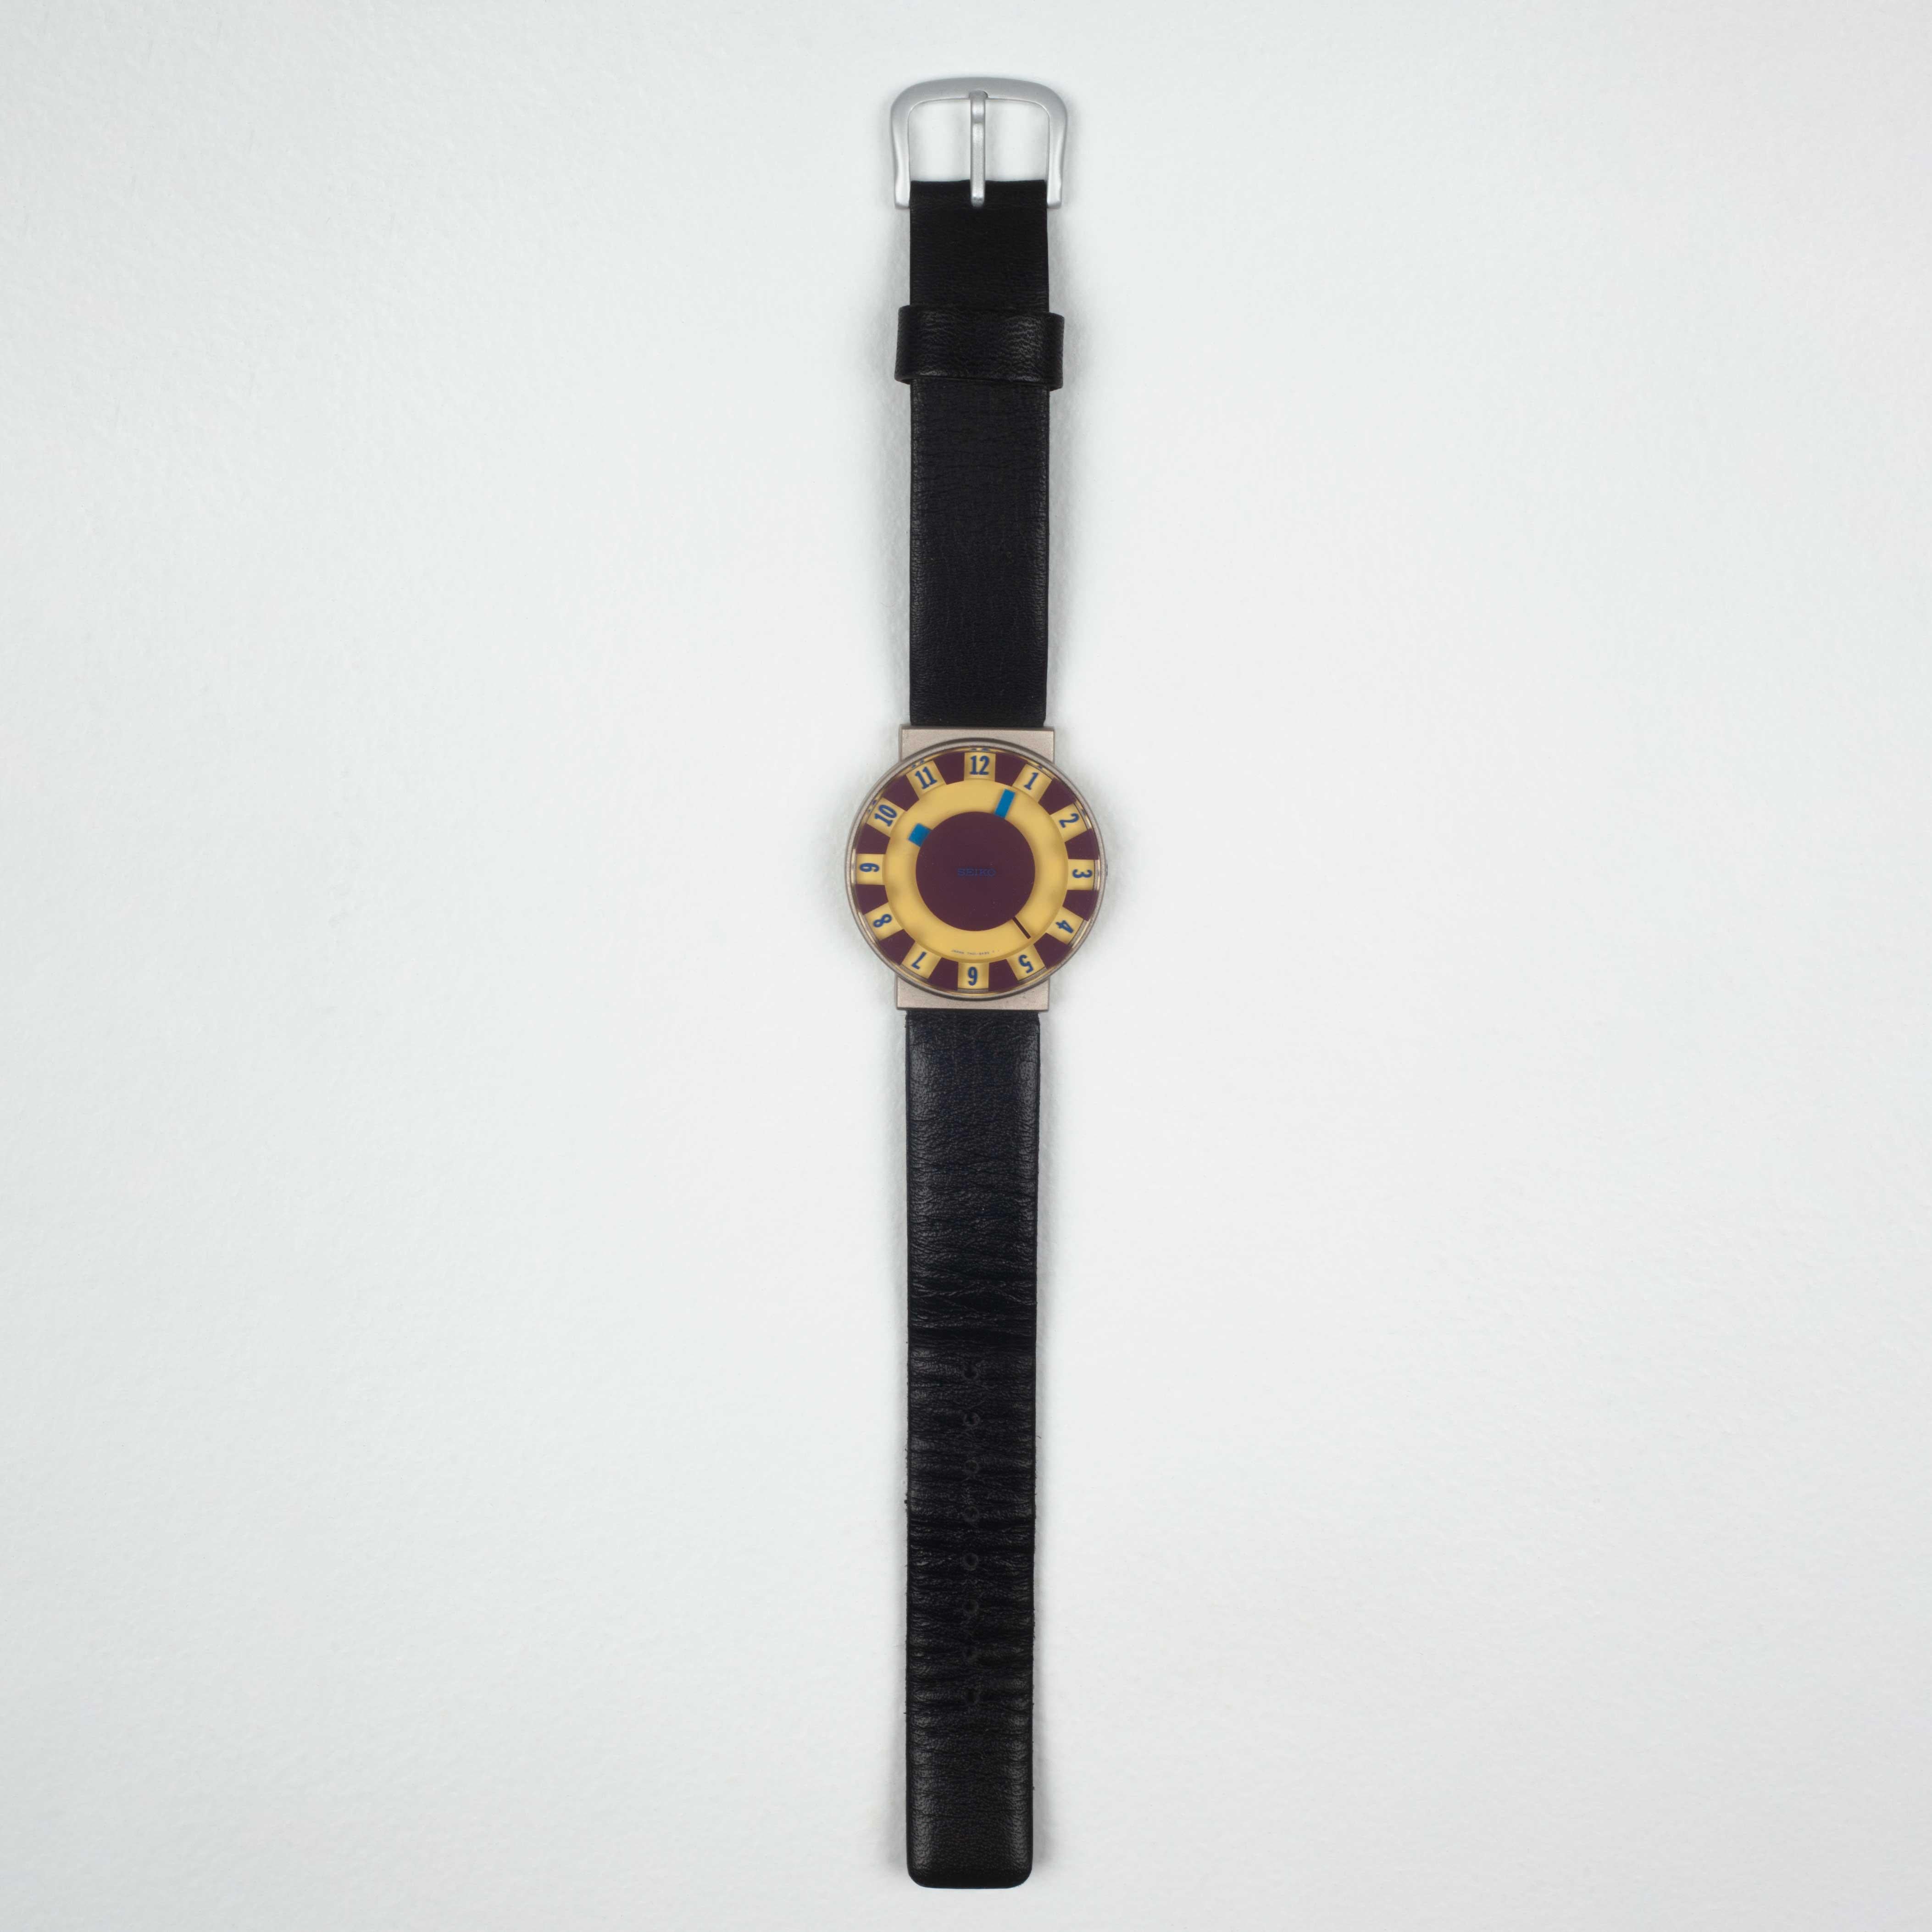 First edition, out-of-production SOTTSASS COLLECTION wrist watches designed by Ettore Sottsass, released in Japan by Seiko in 1992. Yellow and burgundy face and blue hands. A floating effect from colored elements appearing in layers of depth.